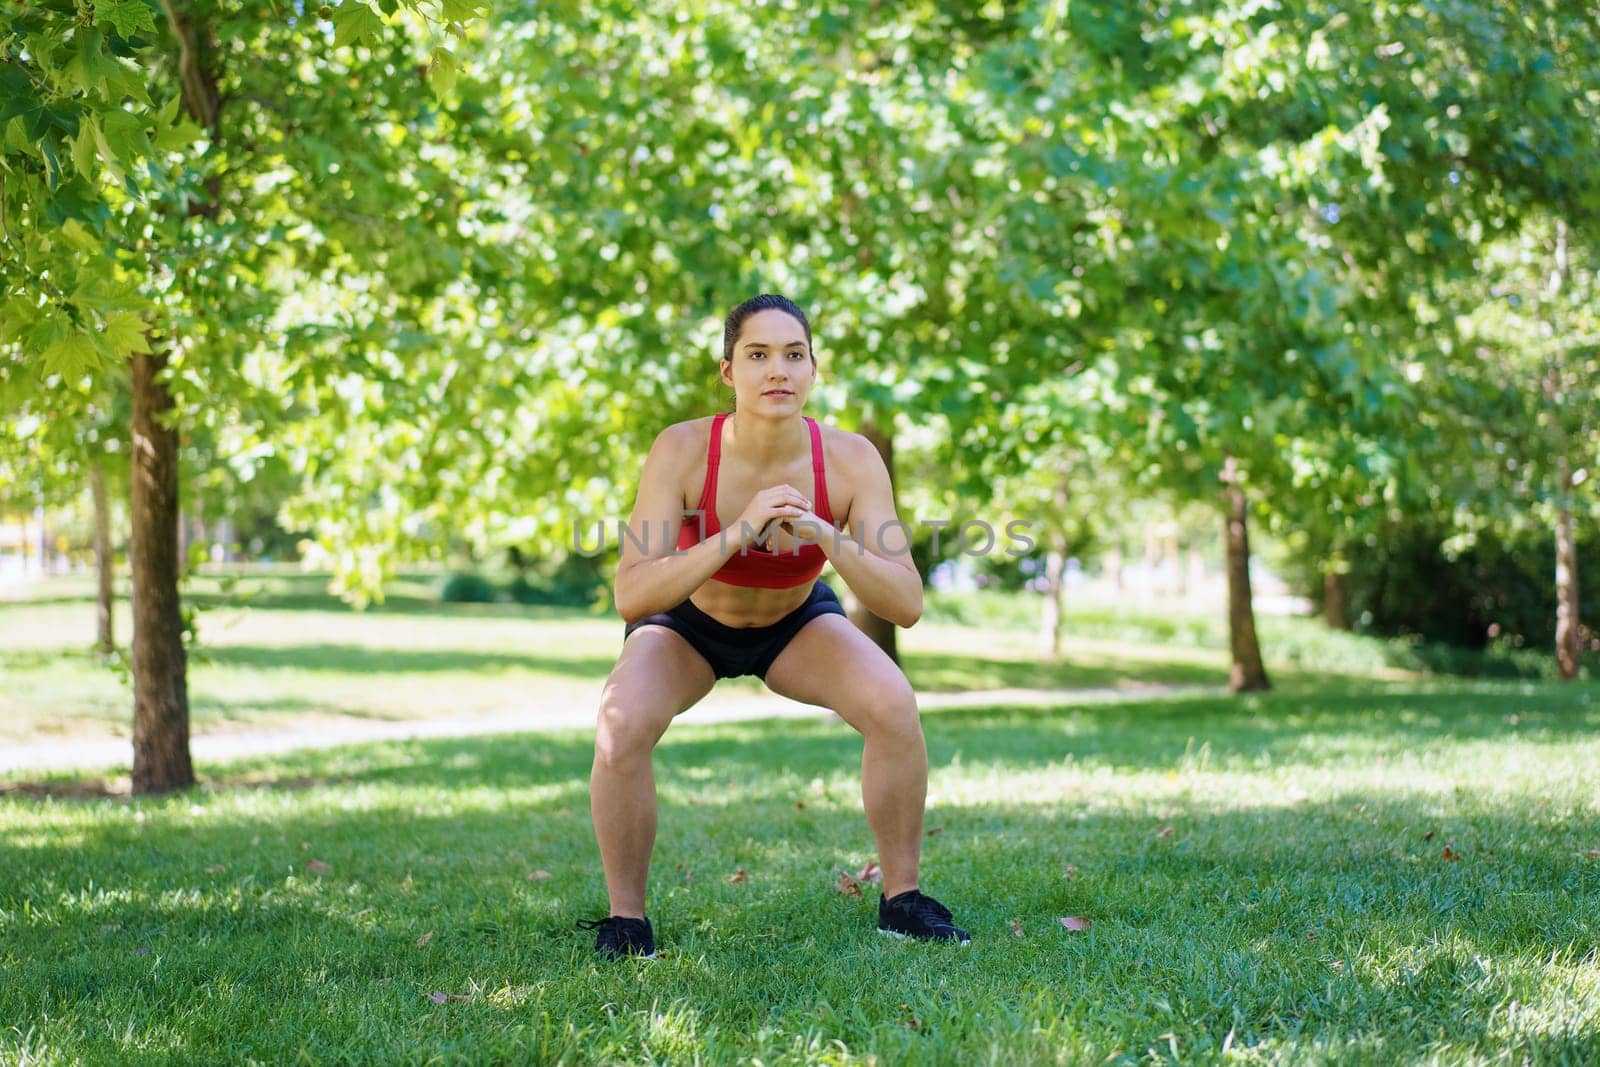 A woman in sportswear is squatting in a sunny park, promoting outdoor fitness, strength training, and a healthy lifestyle for her wellbeing. She highlights active living and dedication to exercise